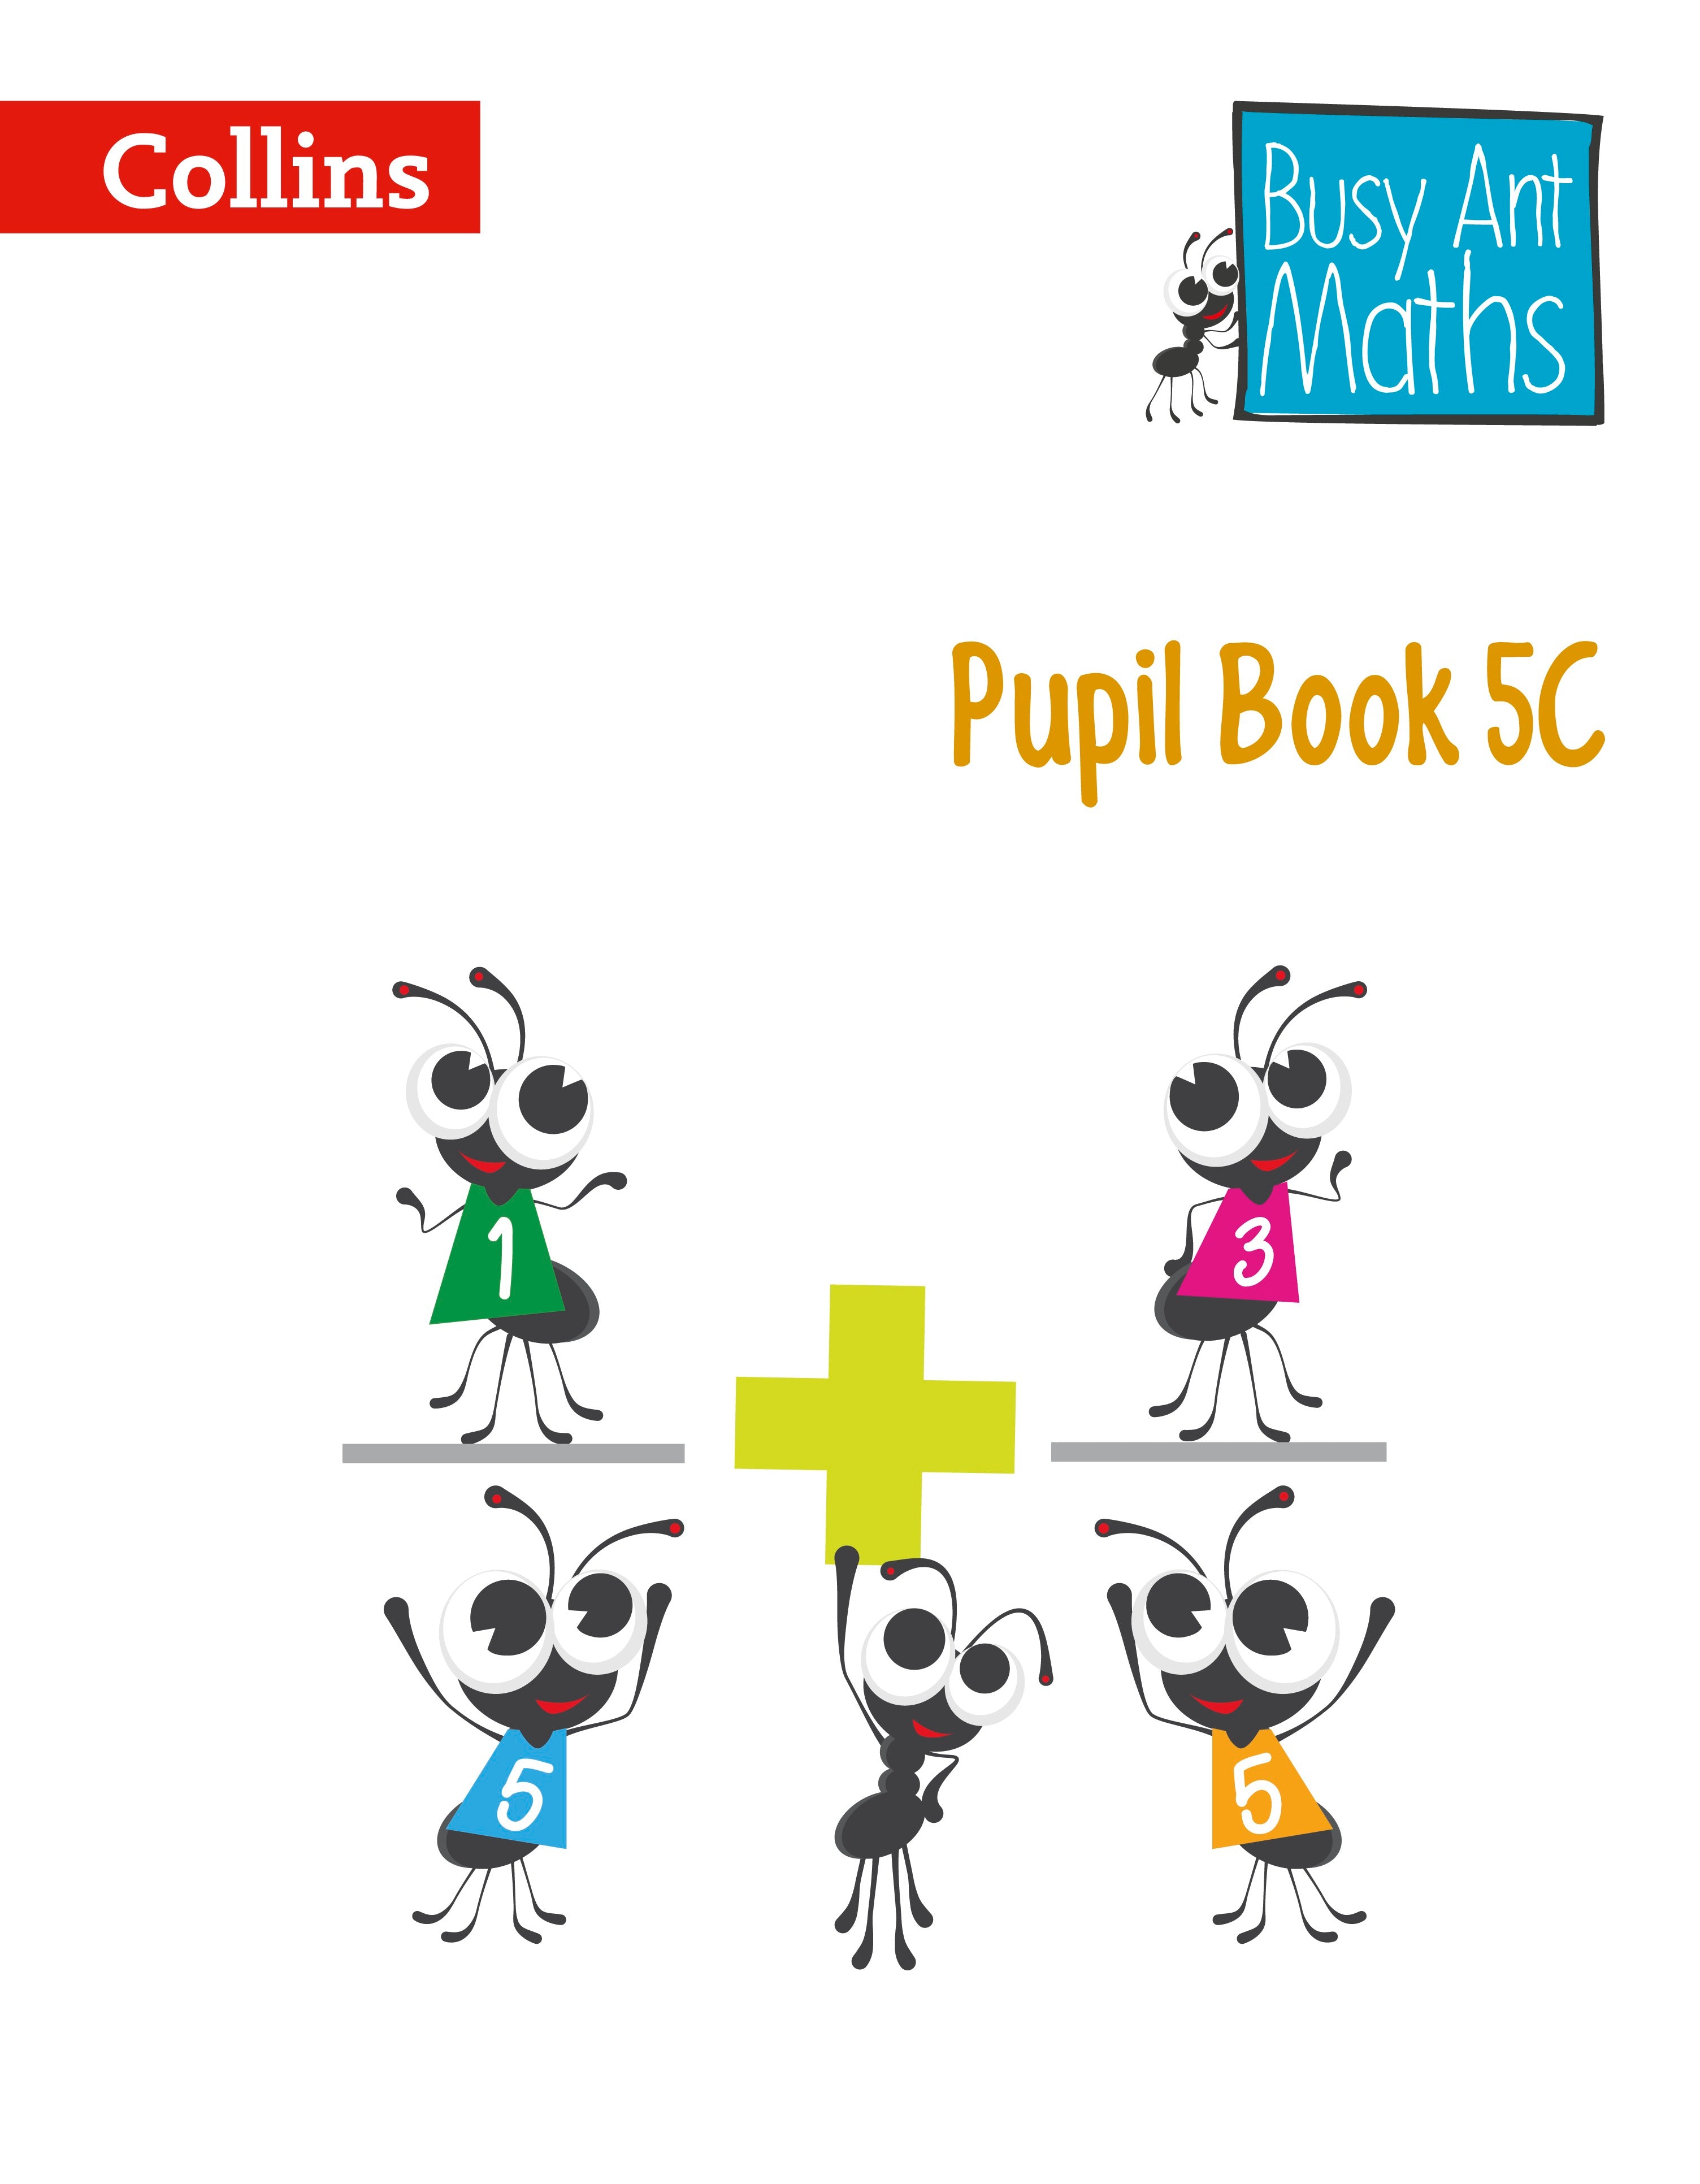 Busy Ant Maths - Pupil Book 5C